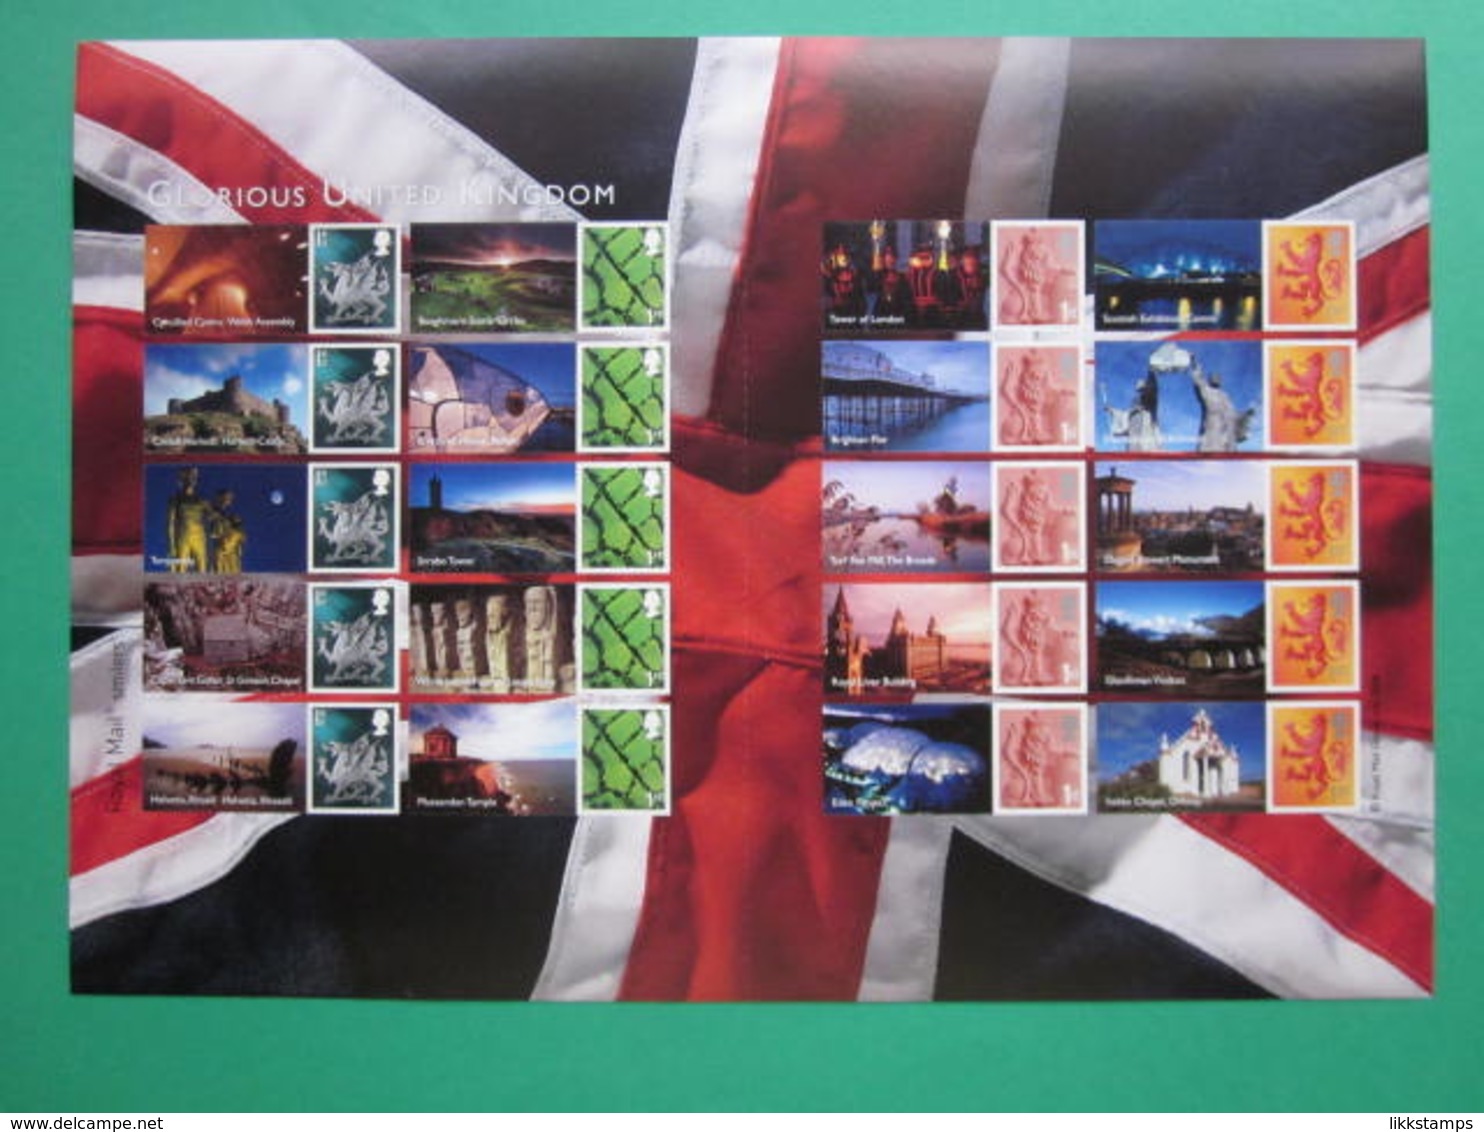 2008 ROYAL MAIL GLORIOUS UNITED KINGDOM GENERIC SMILERS SHEET. #SS0051 - Smilers Sheets